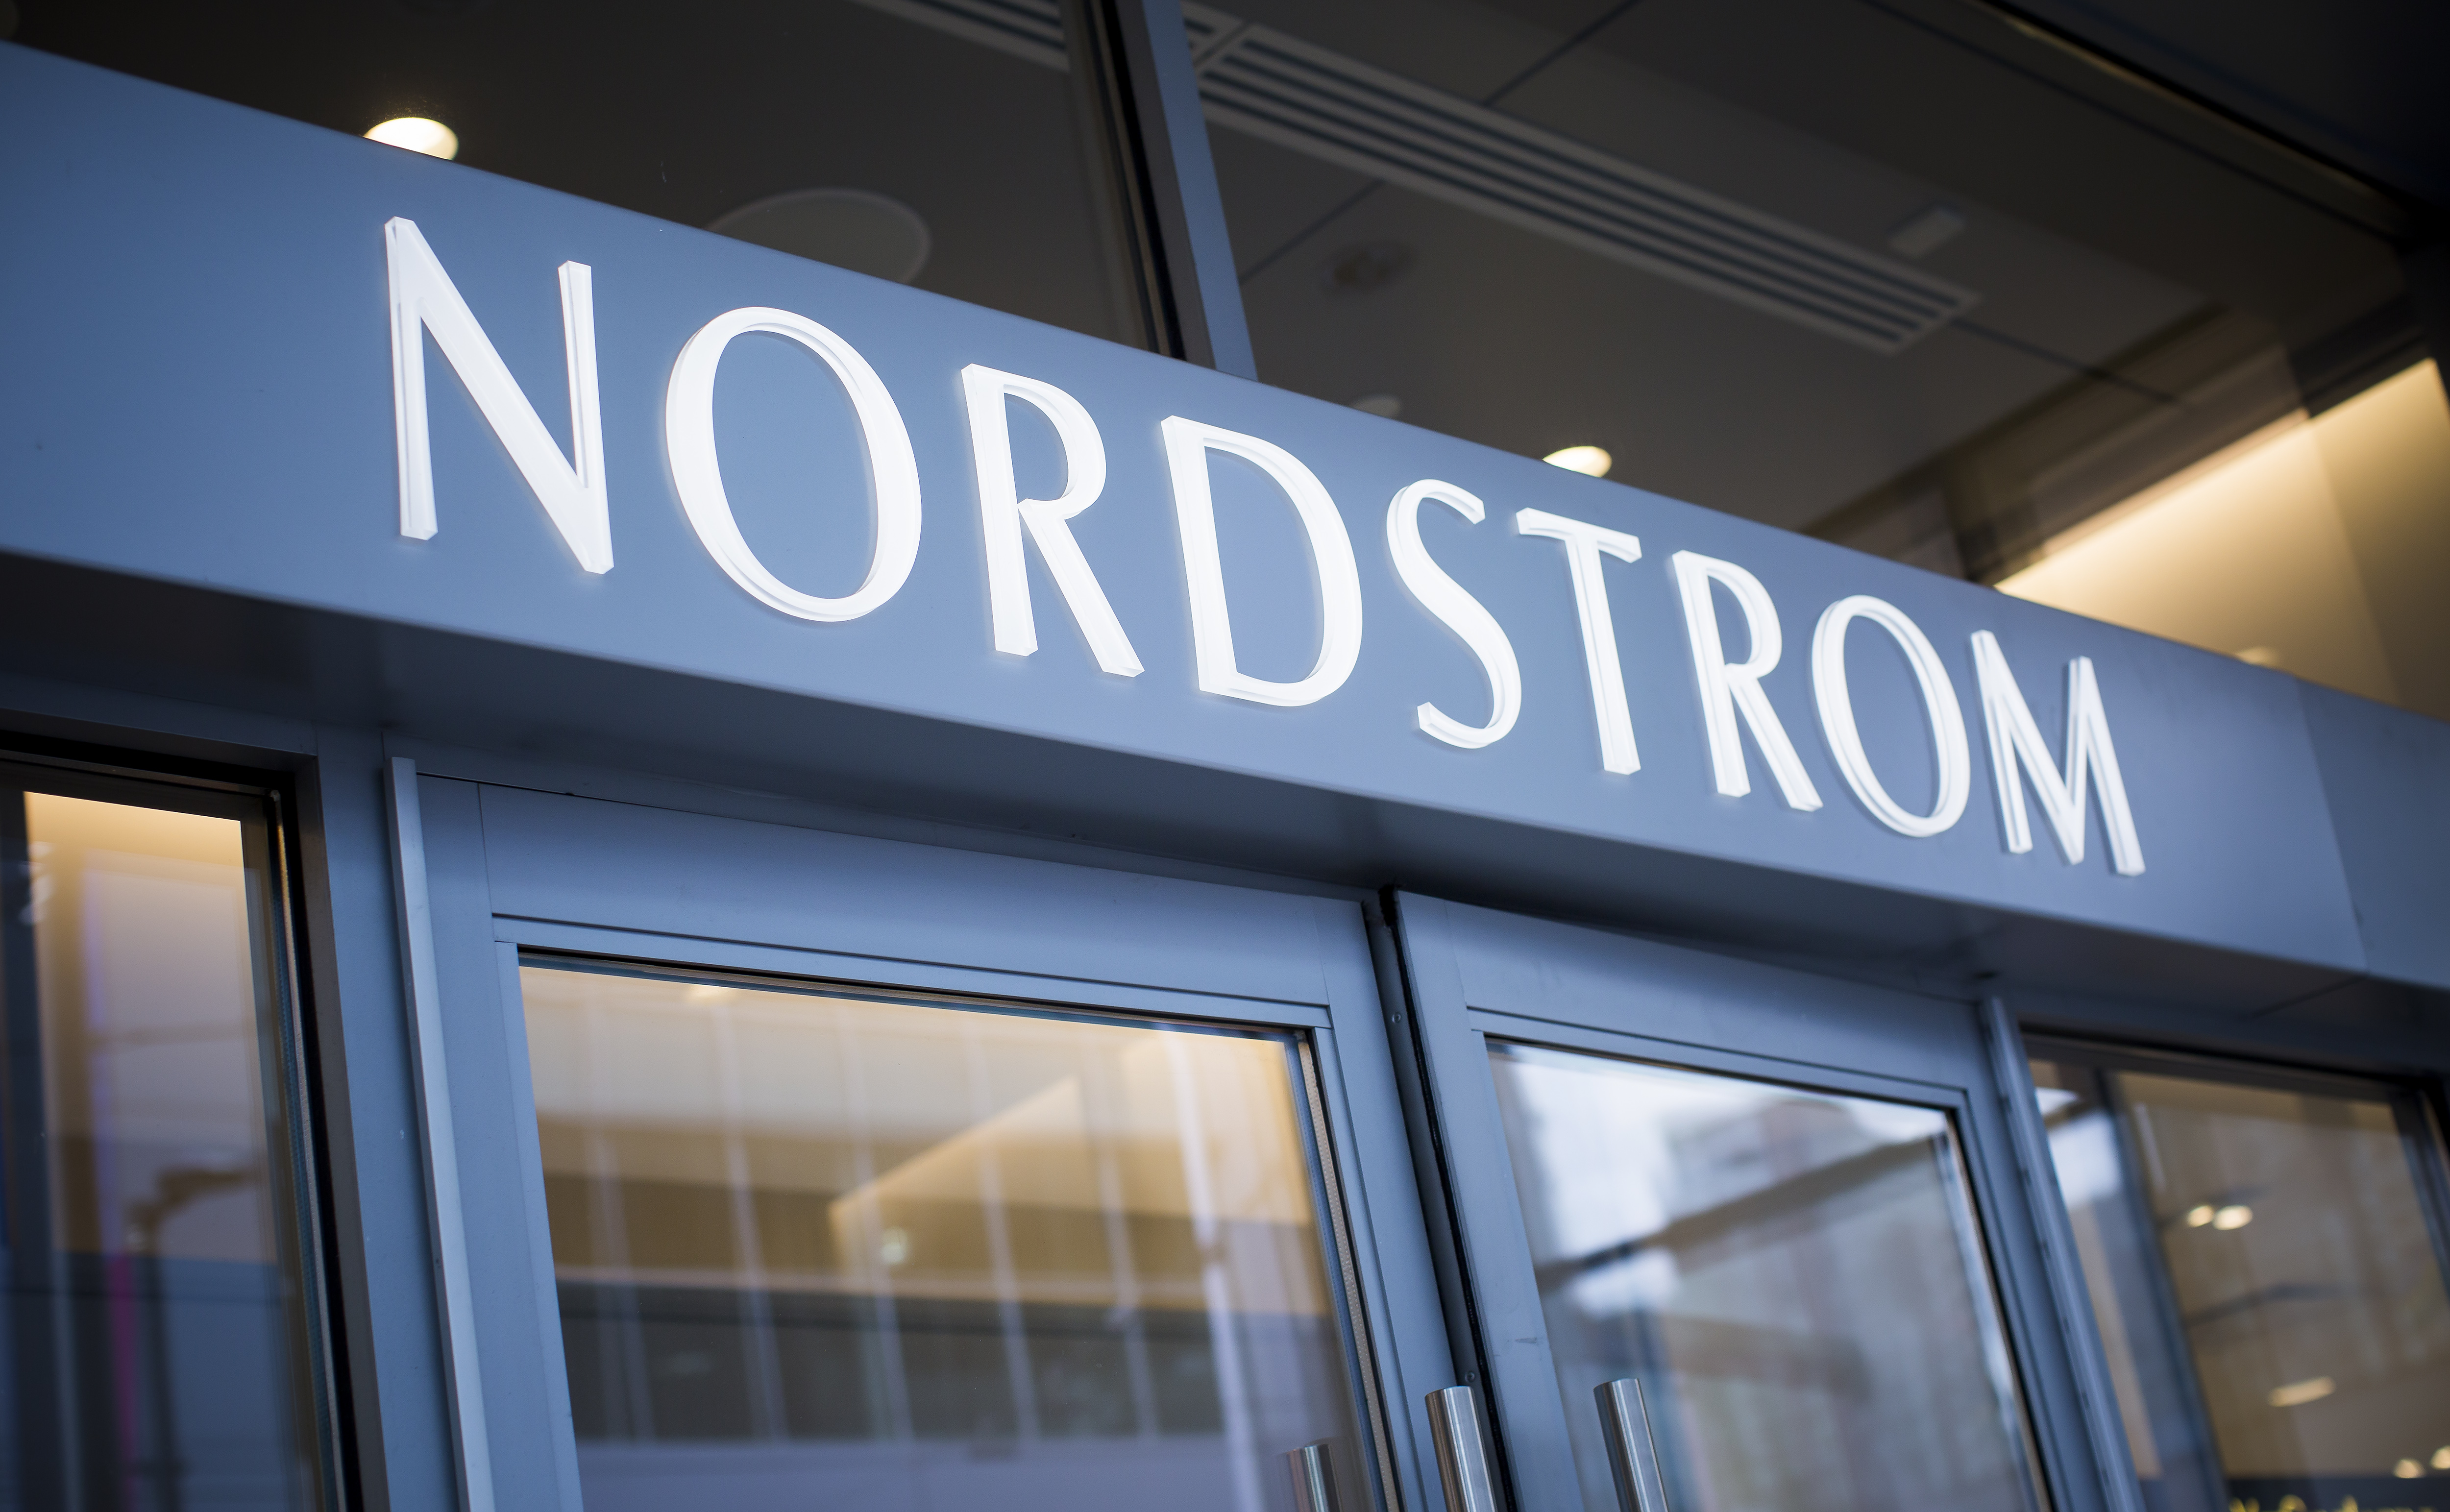 Nordstrom Is Closing San Francisco Stores as Cities' Retail Pain